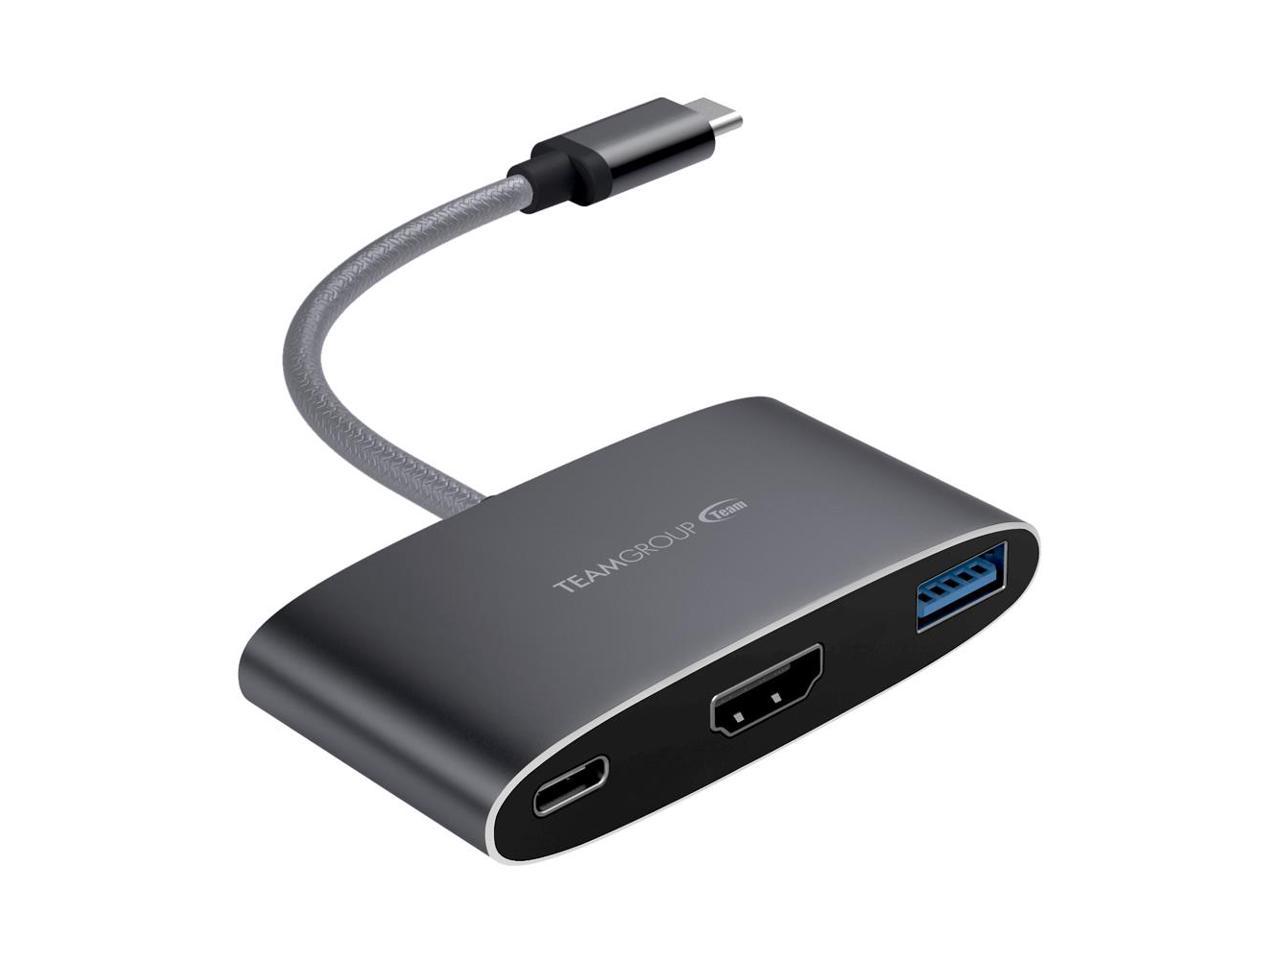 TEAMGROUP 3 in 1 hub for USB Type C power delivery (WT01), 4K HDMI, USB 3.1 Gen1 Adaptor for MacBook - Gray